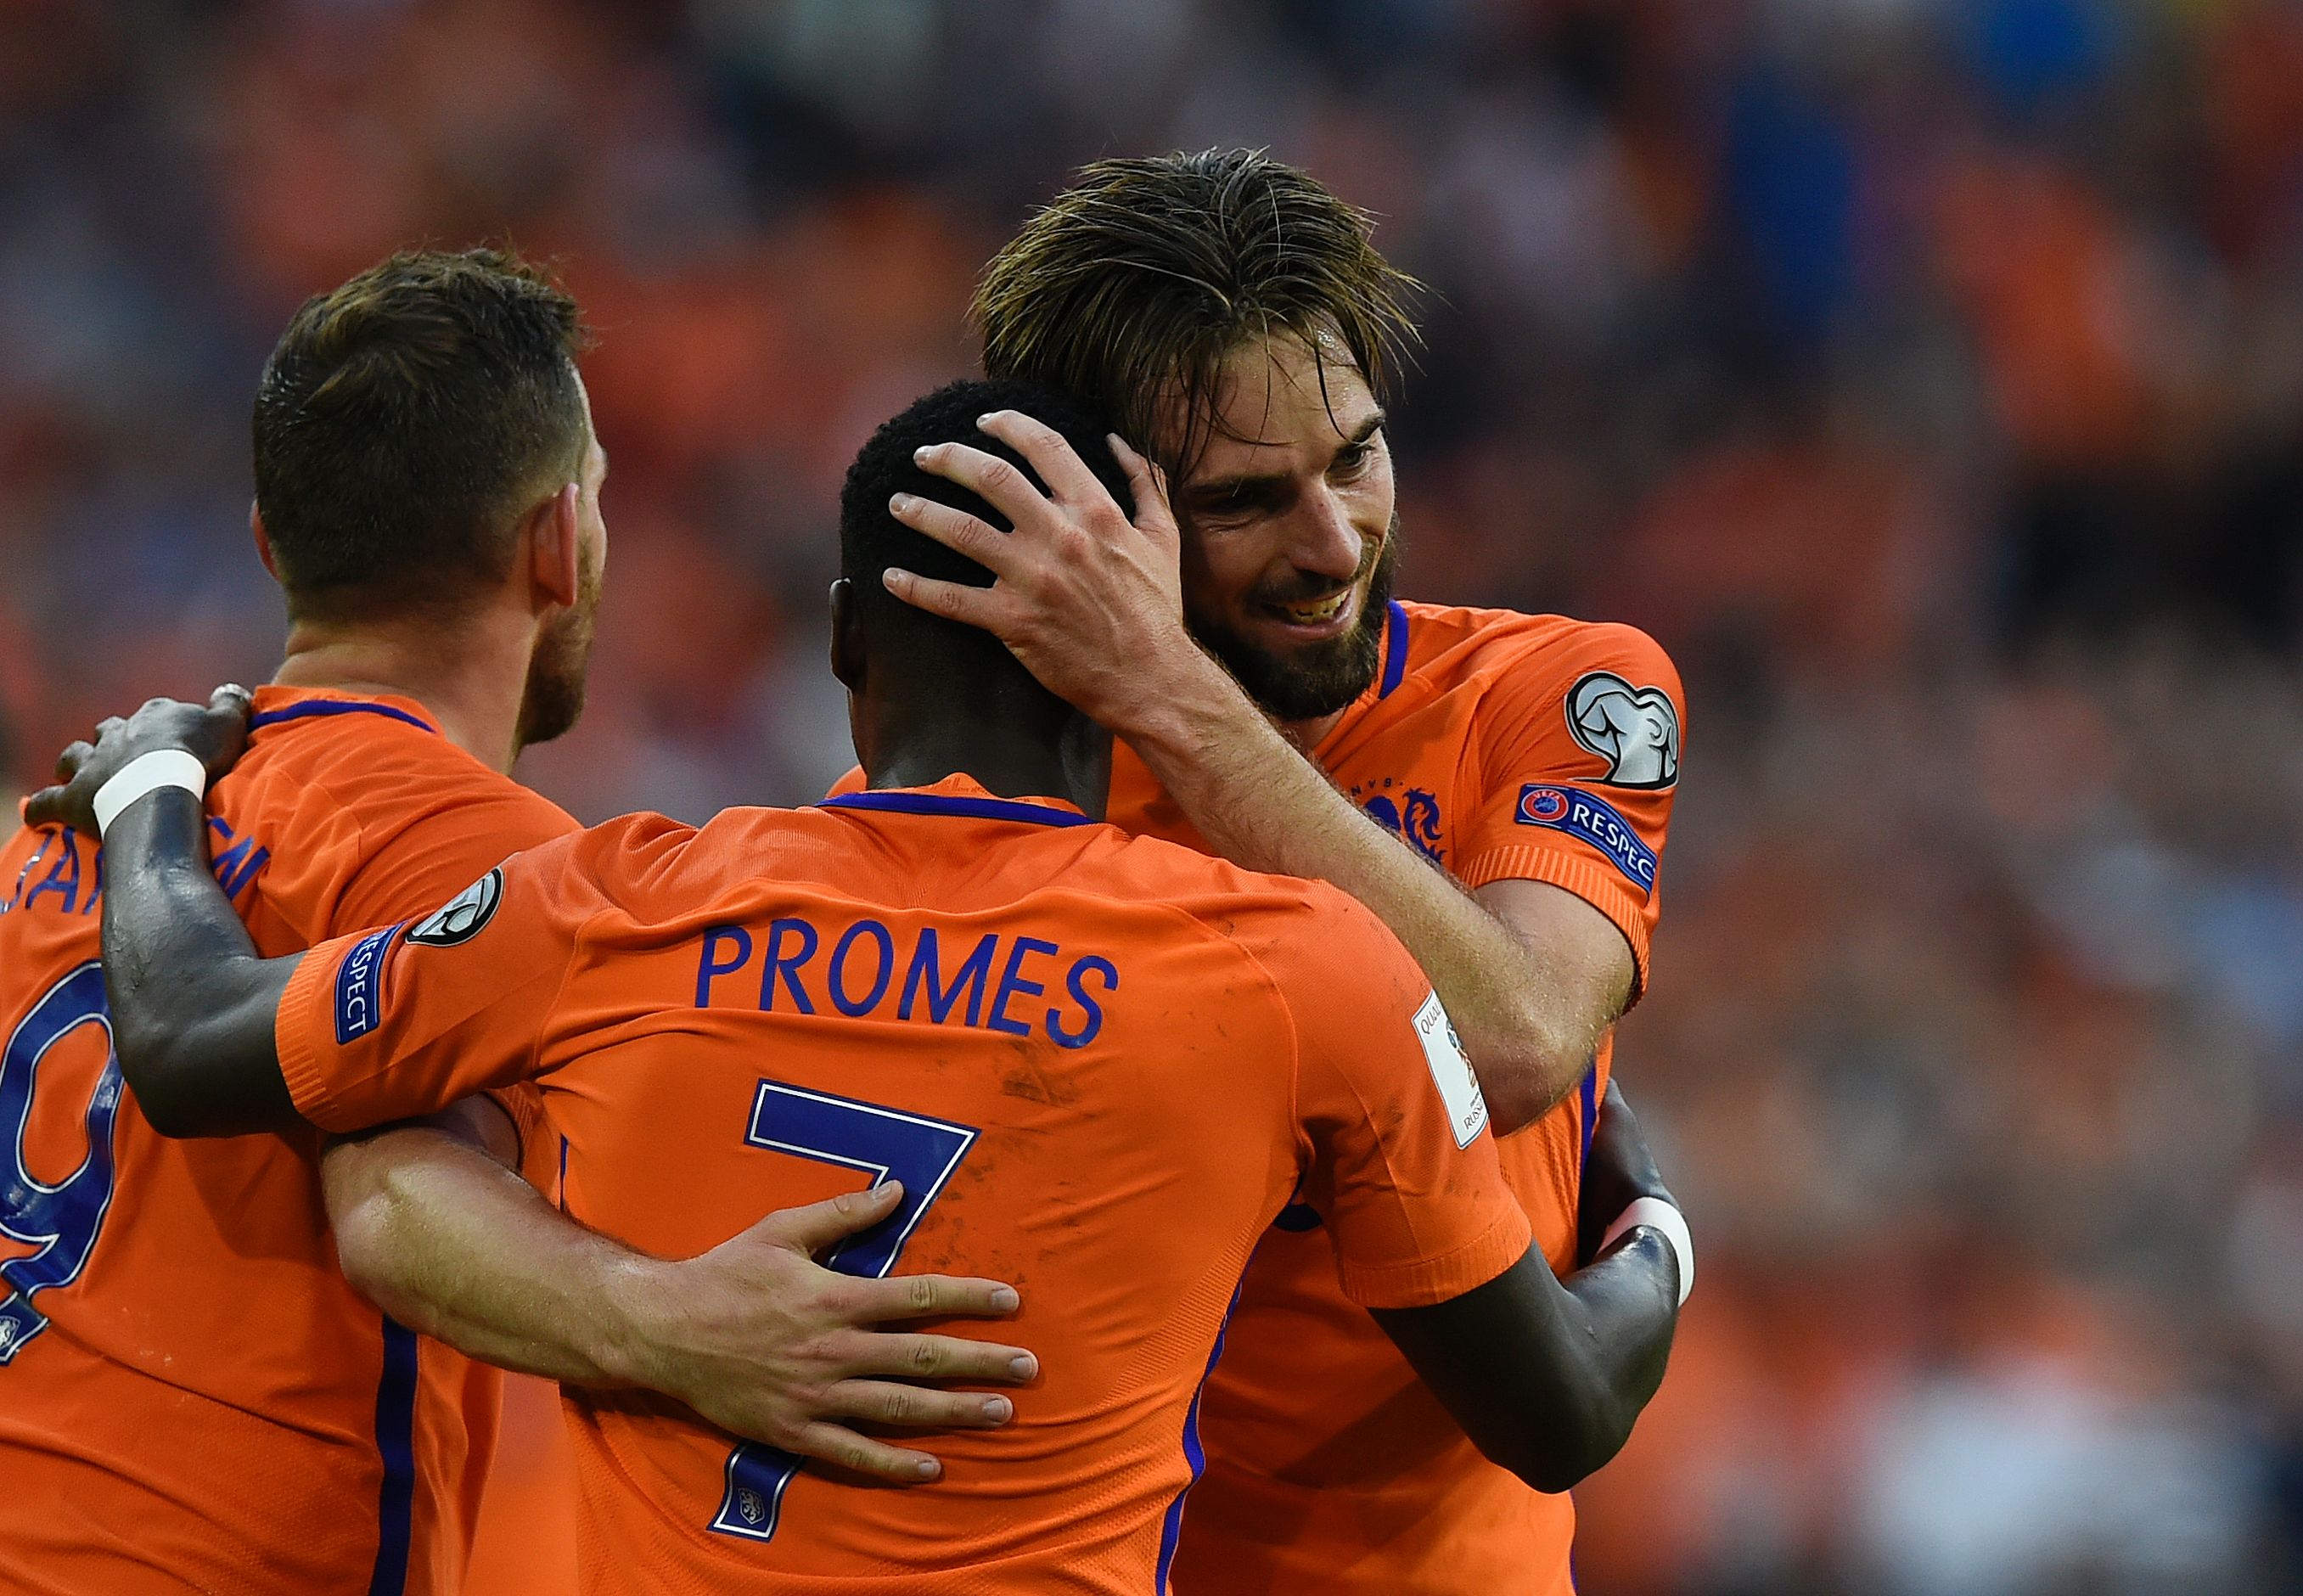 Netherlands midfielder Davy Propper (R) celebrates with teammates after scoring during the FIFA World Cup 2018 qualification football match between Netherlands and Bulgaria in Amsterdam on September 3 , 2017.  / AFP PHOTO / JOHN THYS        (Photo credit should read JOHN THYS/AFP/Getty Images)